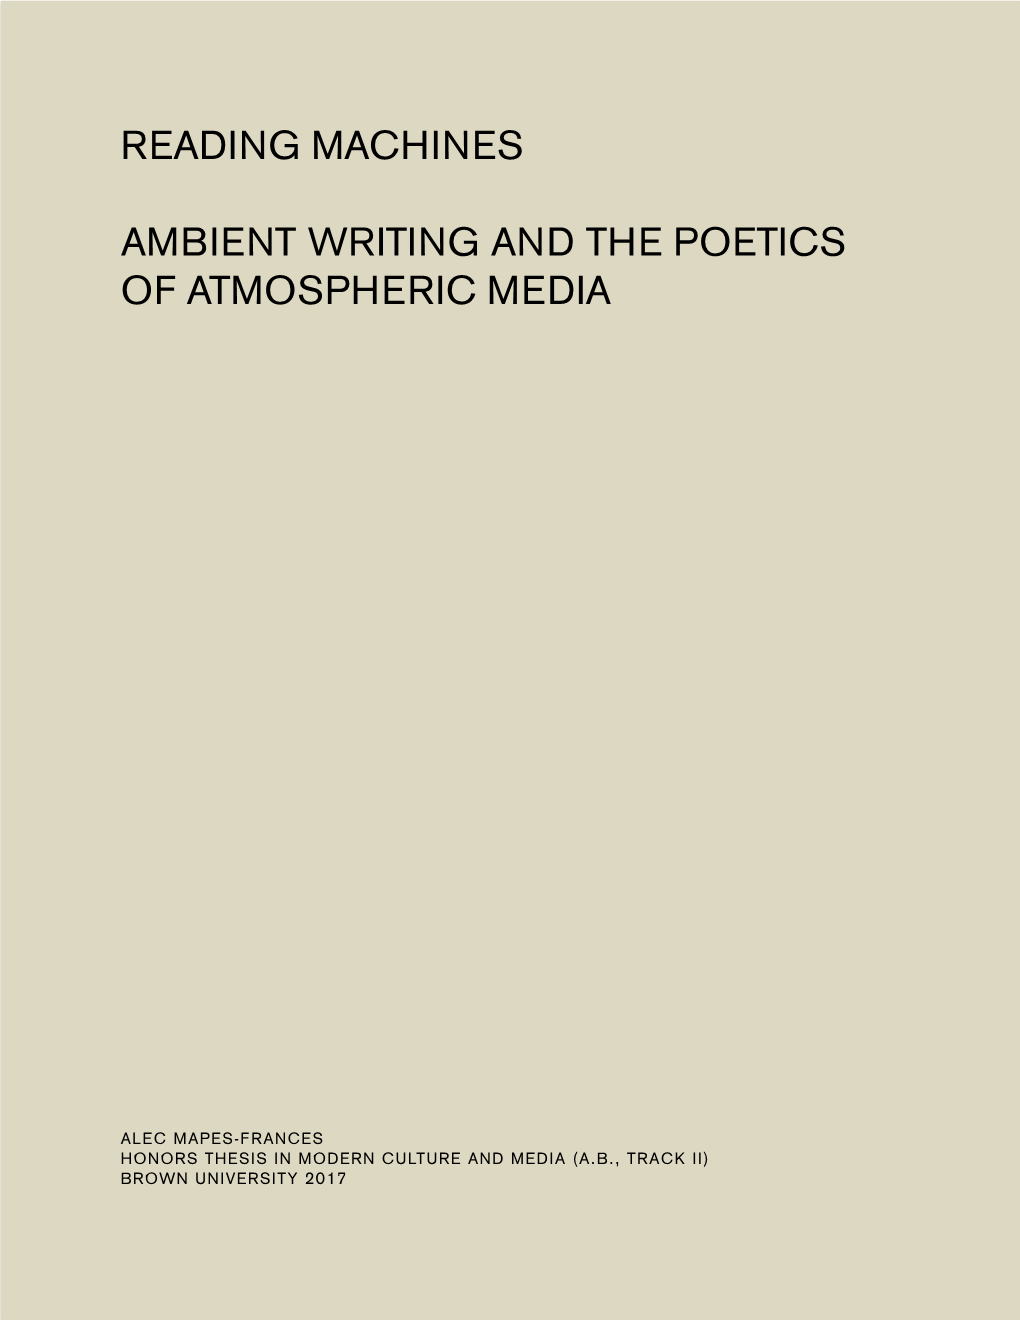 Reading Machines. Ambient Writing and the Poetics of Atmospheric Media